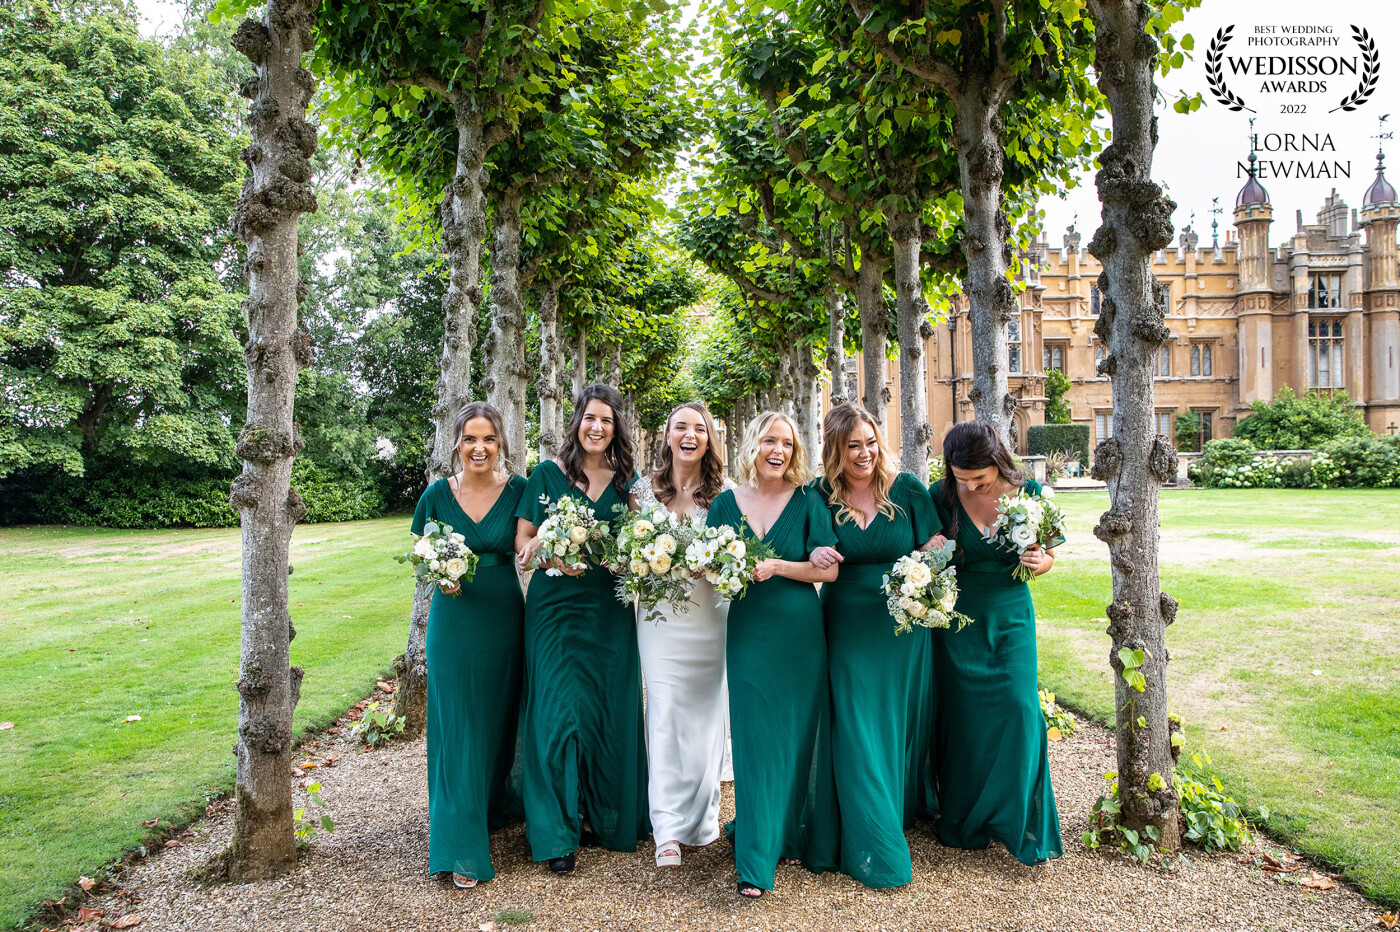 A shot from Sarah & Ally’s amazing wedding at Knebworth House, a fun shot of Sarah with her bridesmaids with Knebworth house in the background.